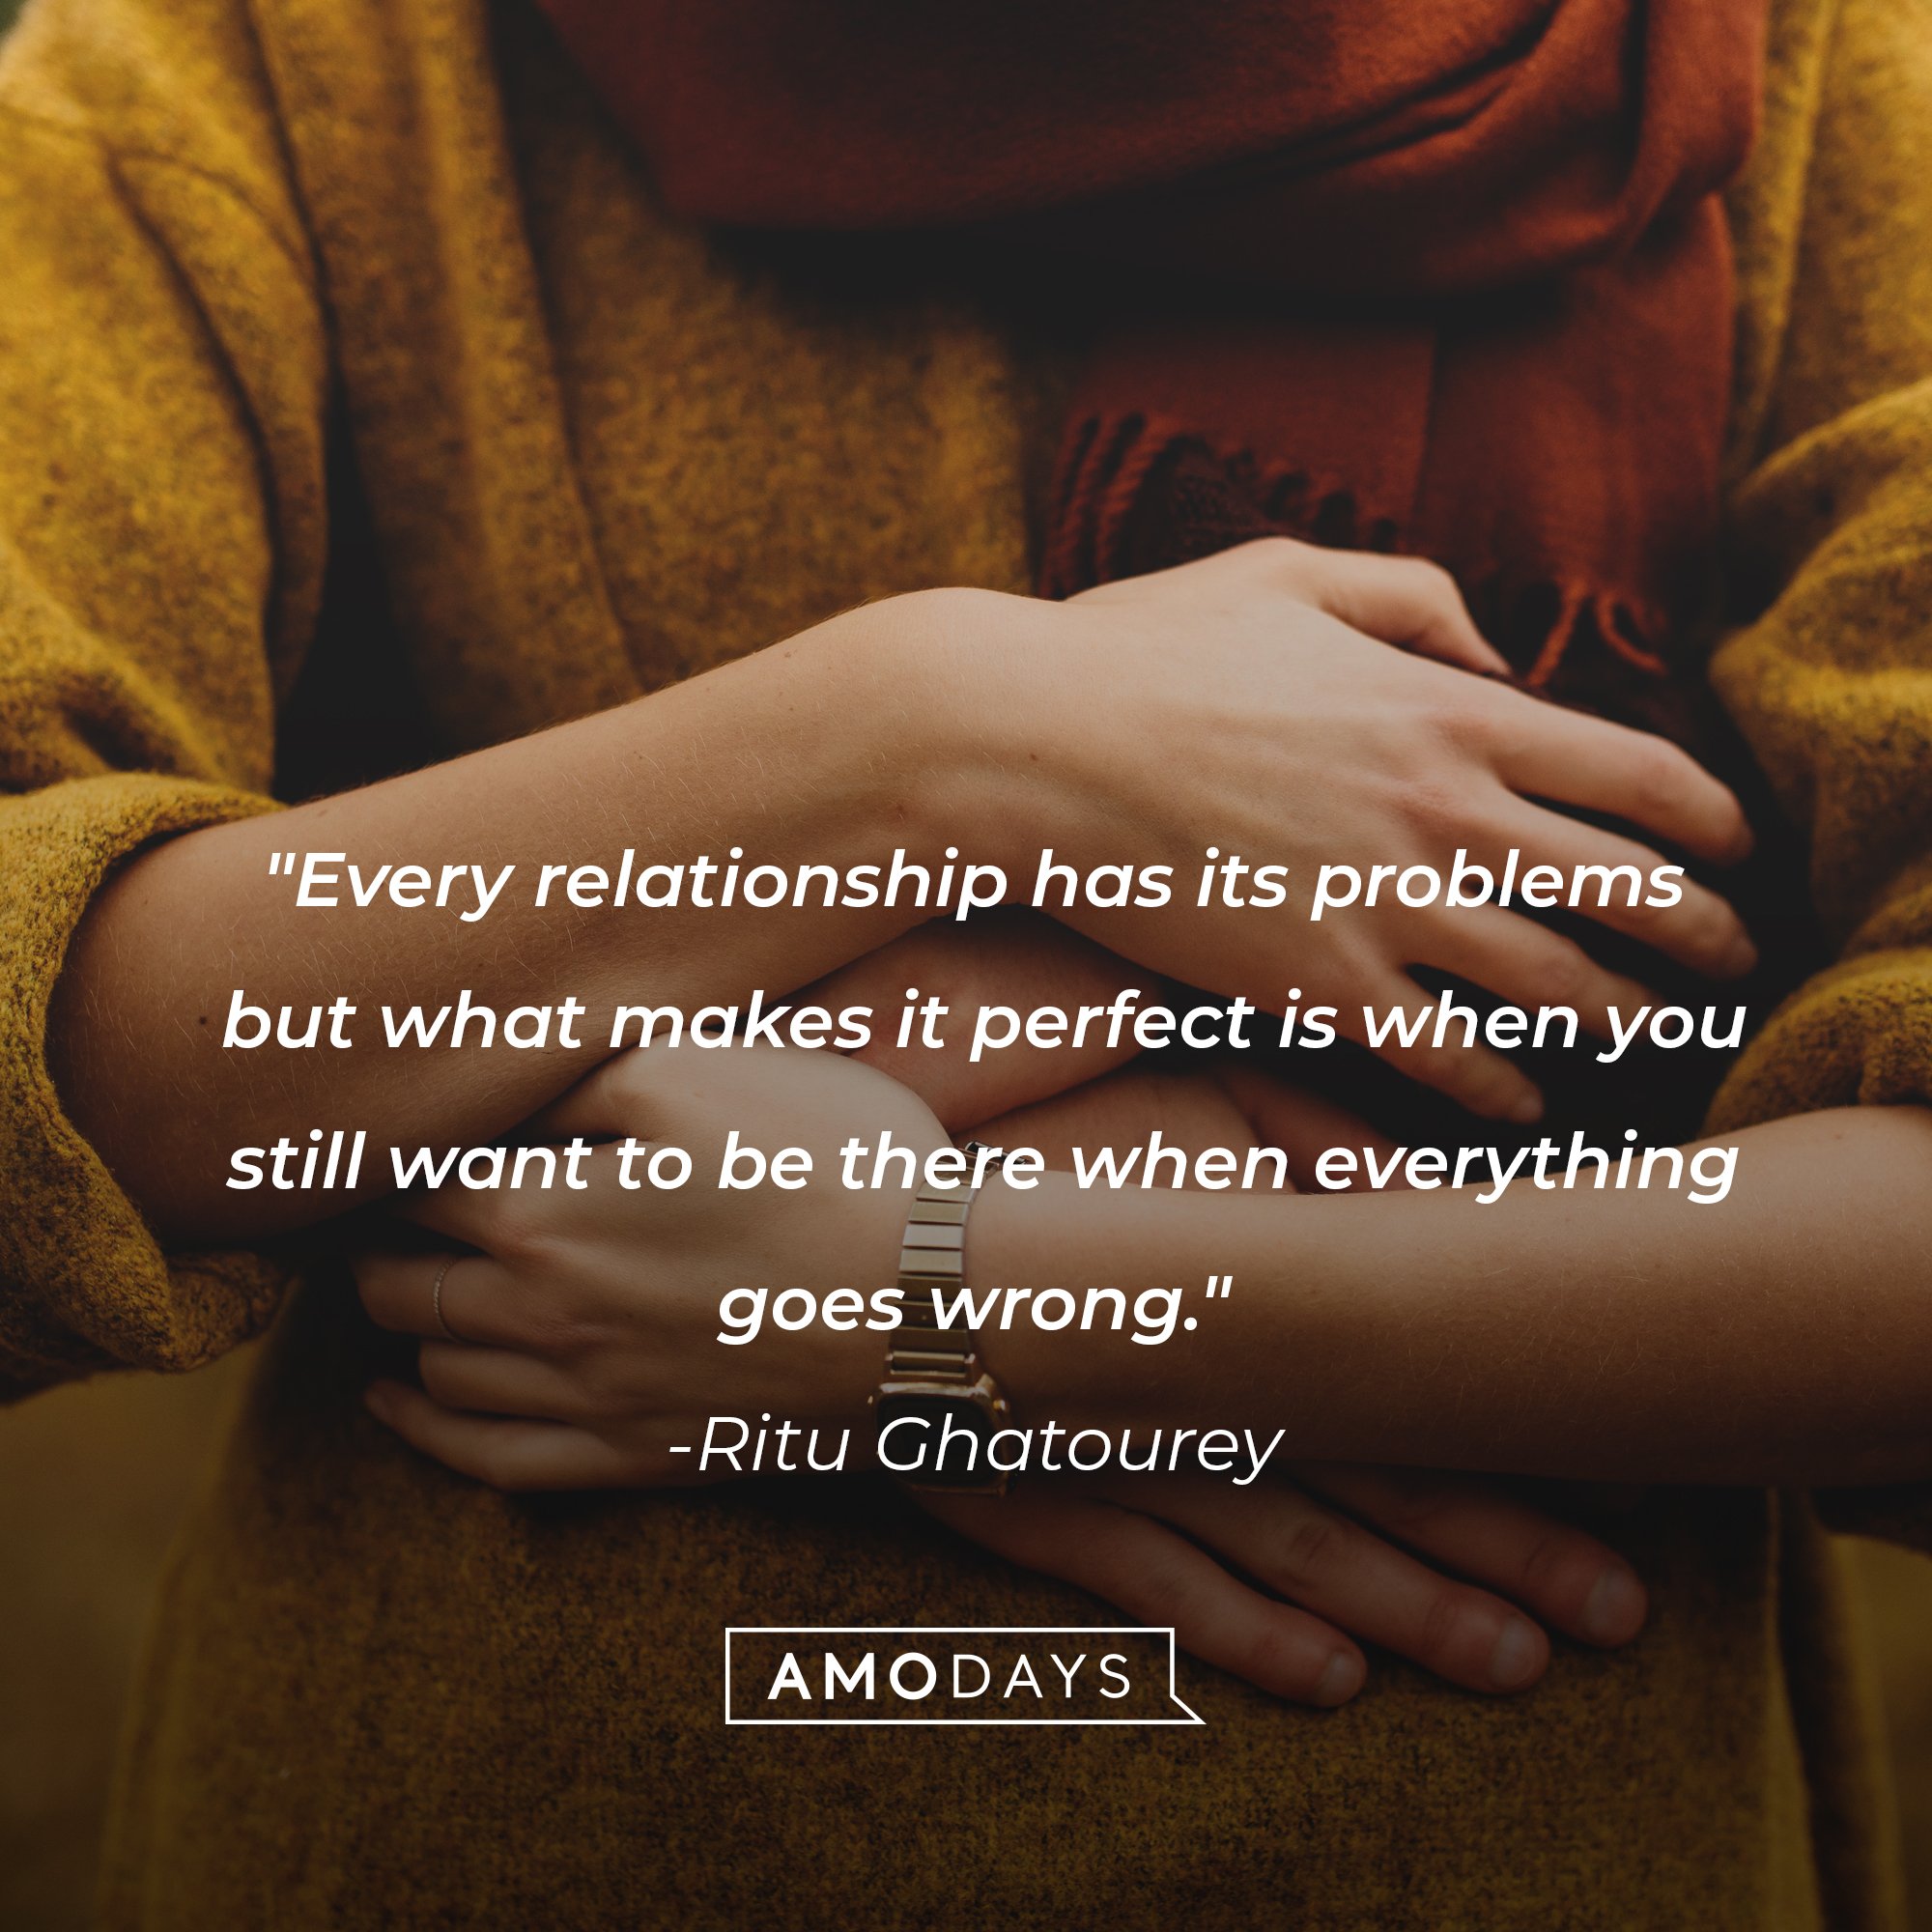  Ritu Ghatourey’s quote: "Every relationship has its problems but what makes it perfect is when you still want to be there when everything goes wrong." | Image: AmoDays